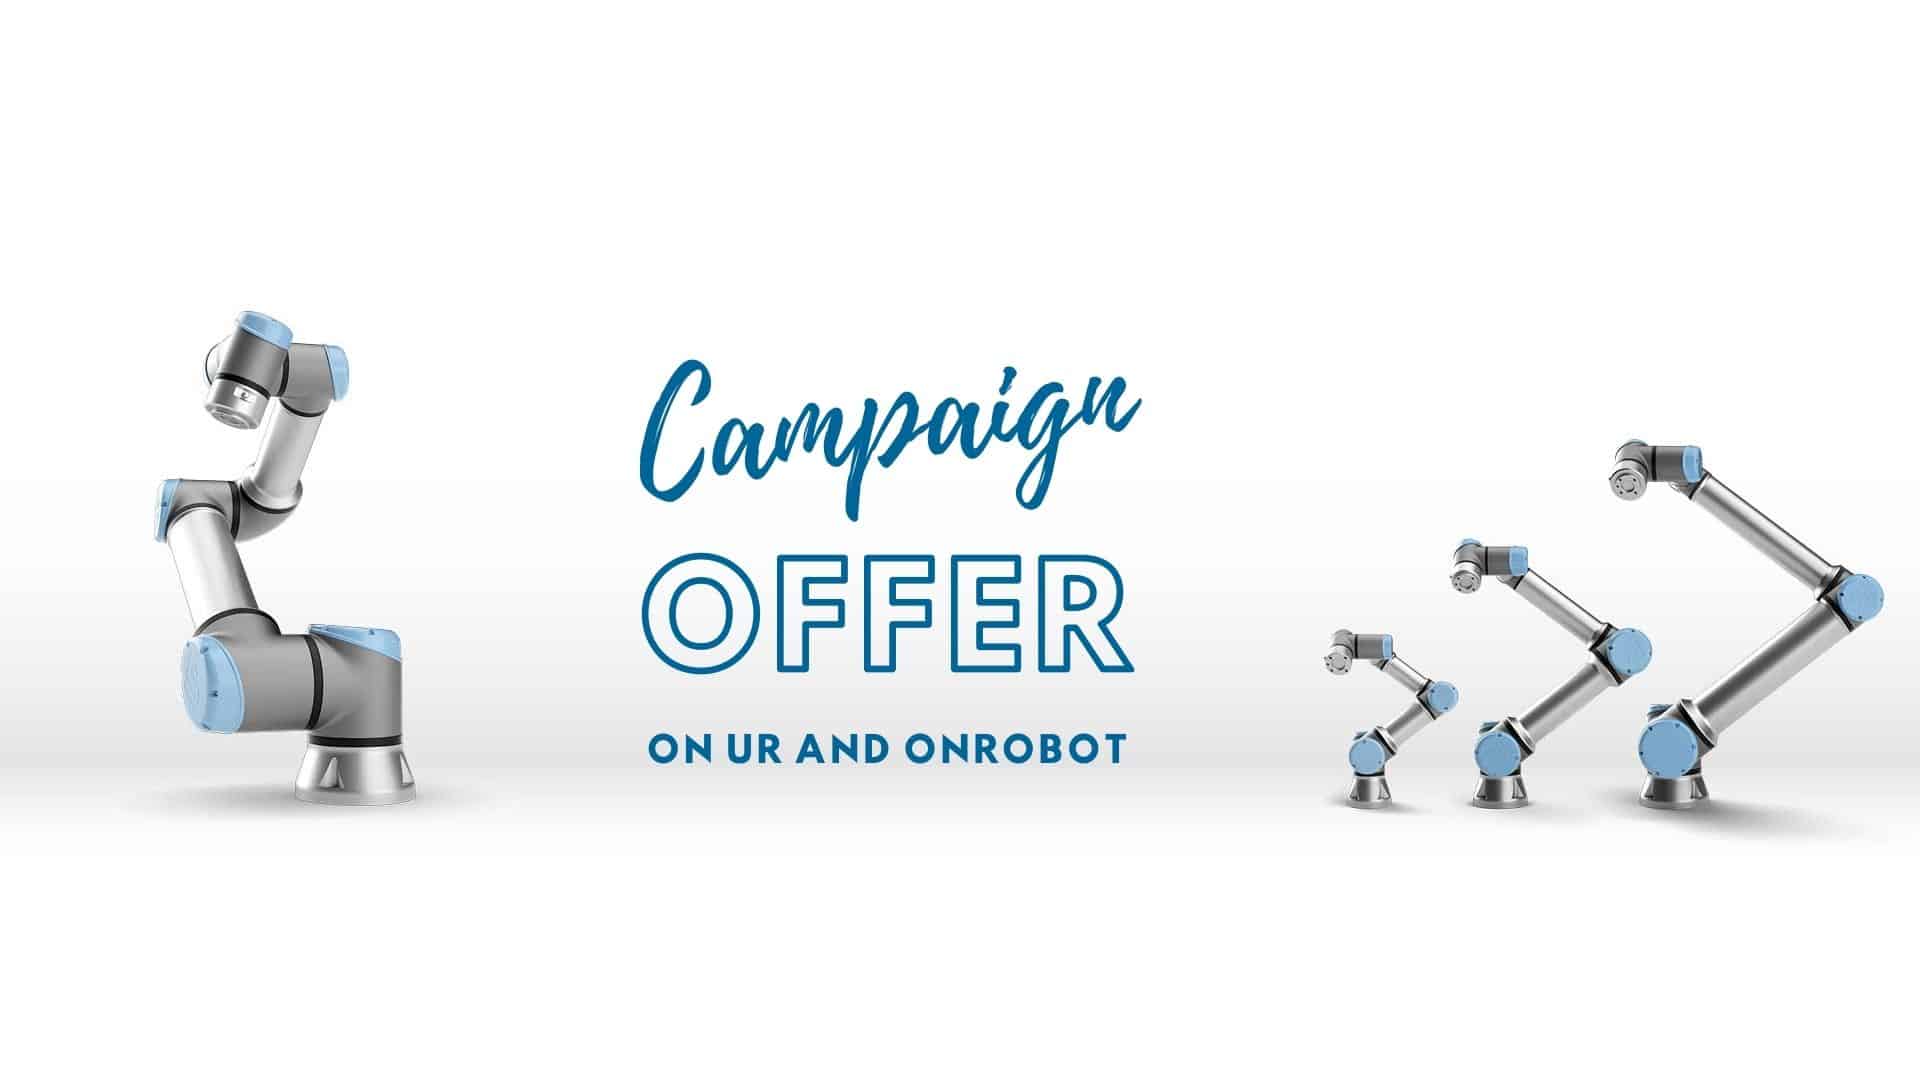 Campaign offer on UR and OnRobot